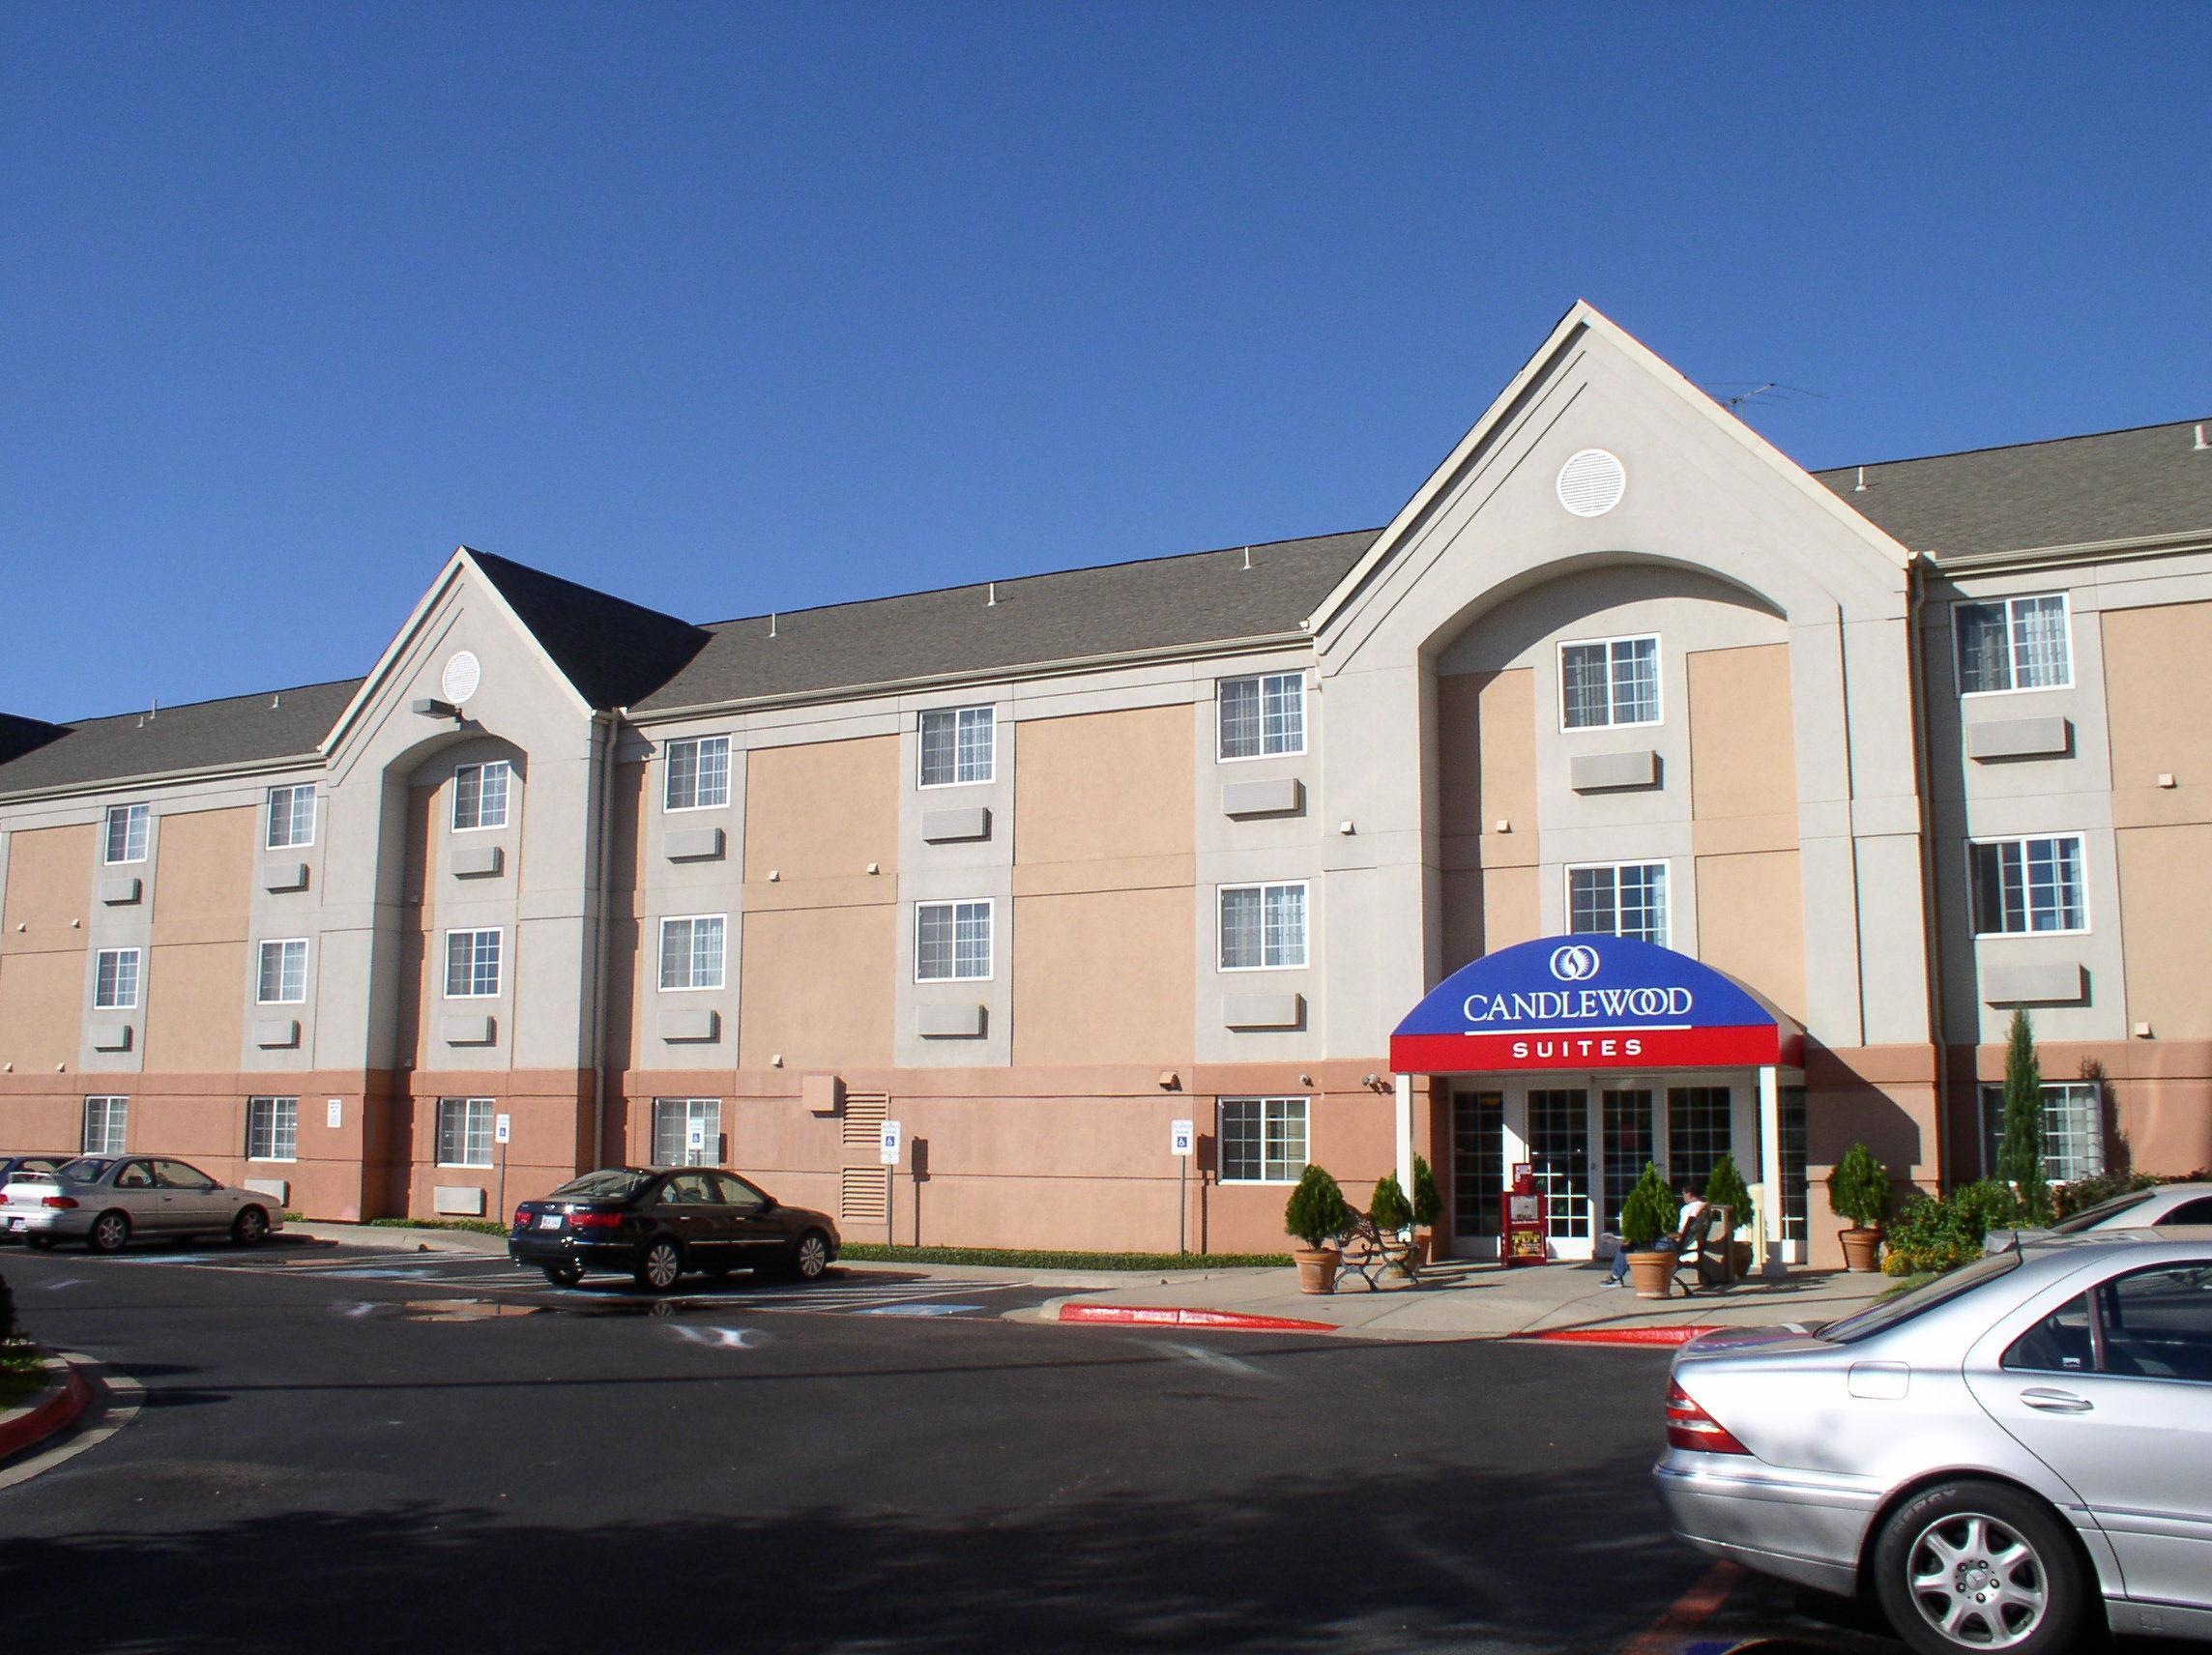 Photo of Candlewood Suites Dallas - By The Galleria, Dallas, TX